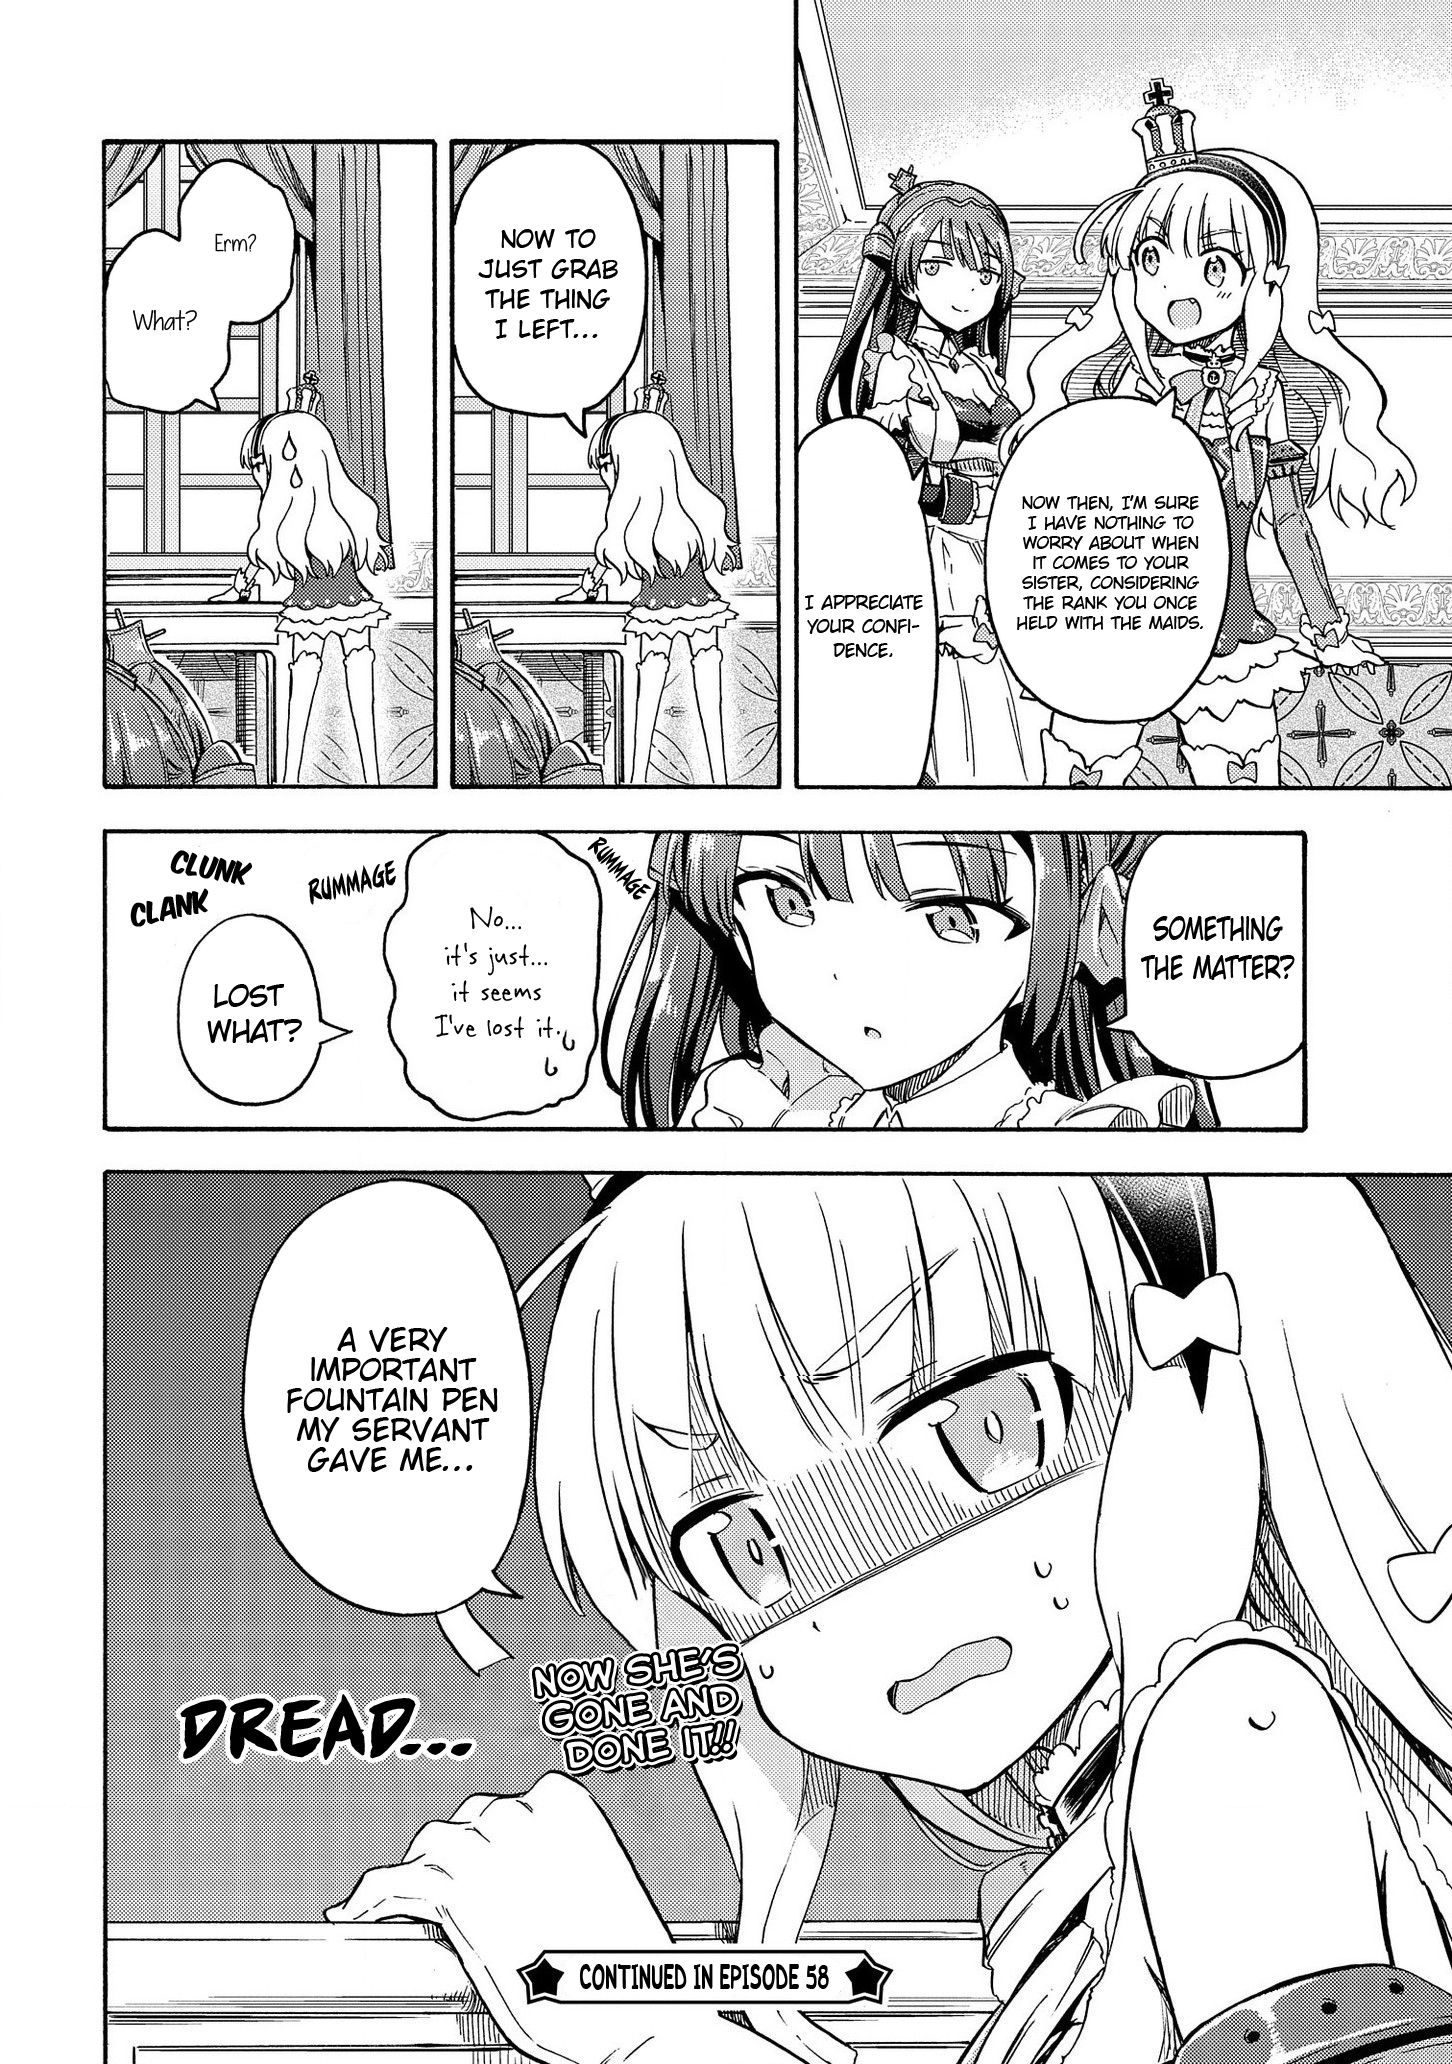 Azur Lane: Queen's Orders chapter 57 page 6